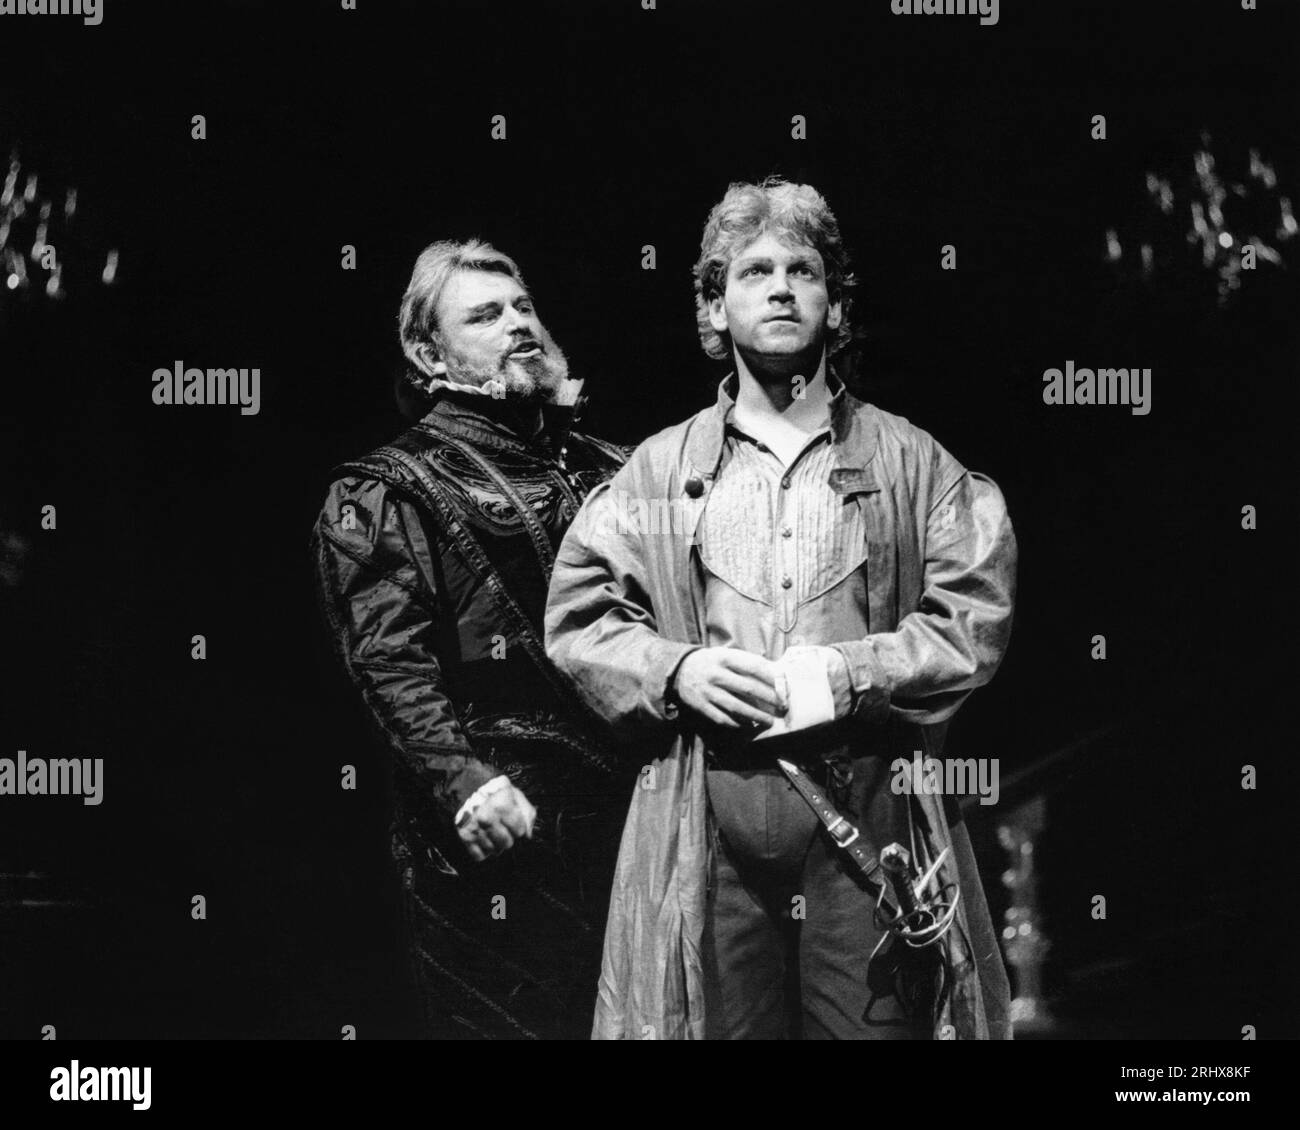 l-r: Brian Blessed (Claudius), Kenneth Branagh (Laertes) in HAMLET by Shakespeare at the Royal Shakespeare Company (RSC), Royal Shakespeare Theatre, Stratford-upon-Avon, England  05/09/1984  design: Maria Bjornson  lighting: Chris Ellis  fights: Malcolm Ranson  director: Ron Daniels Stock Photo